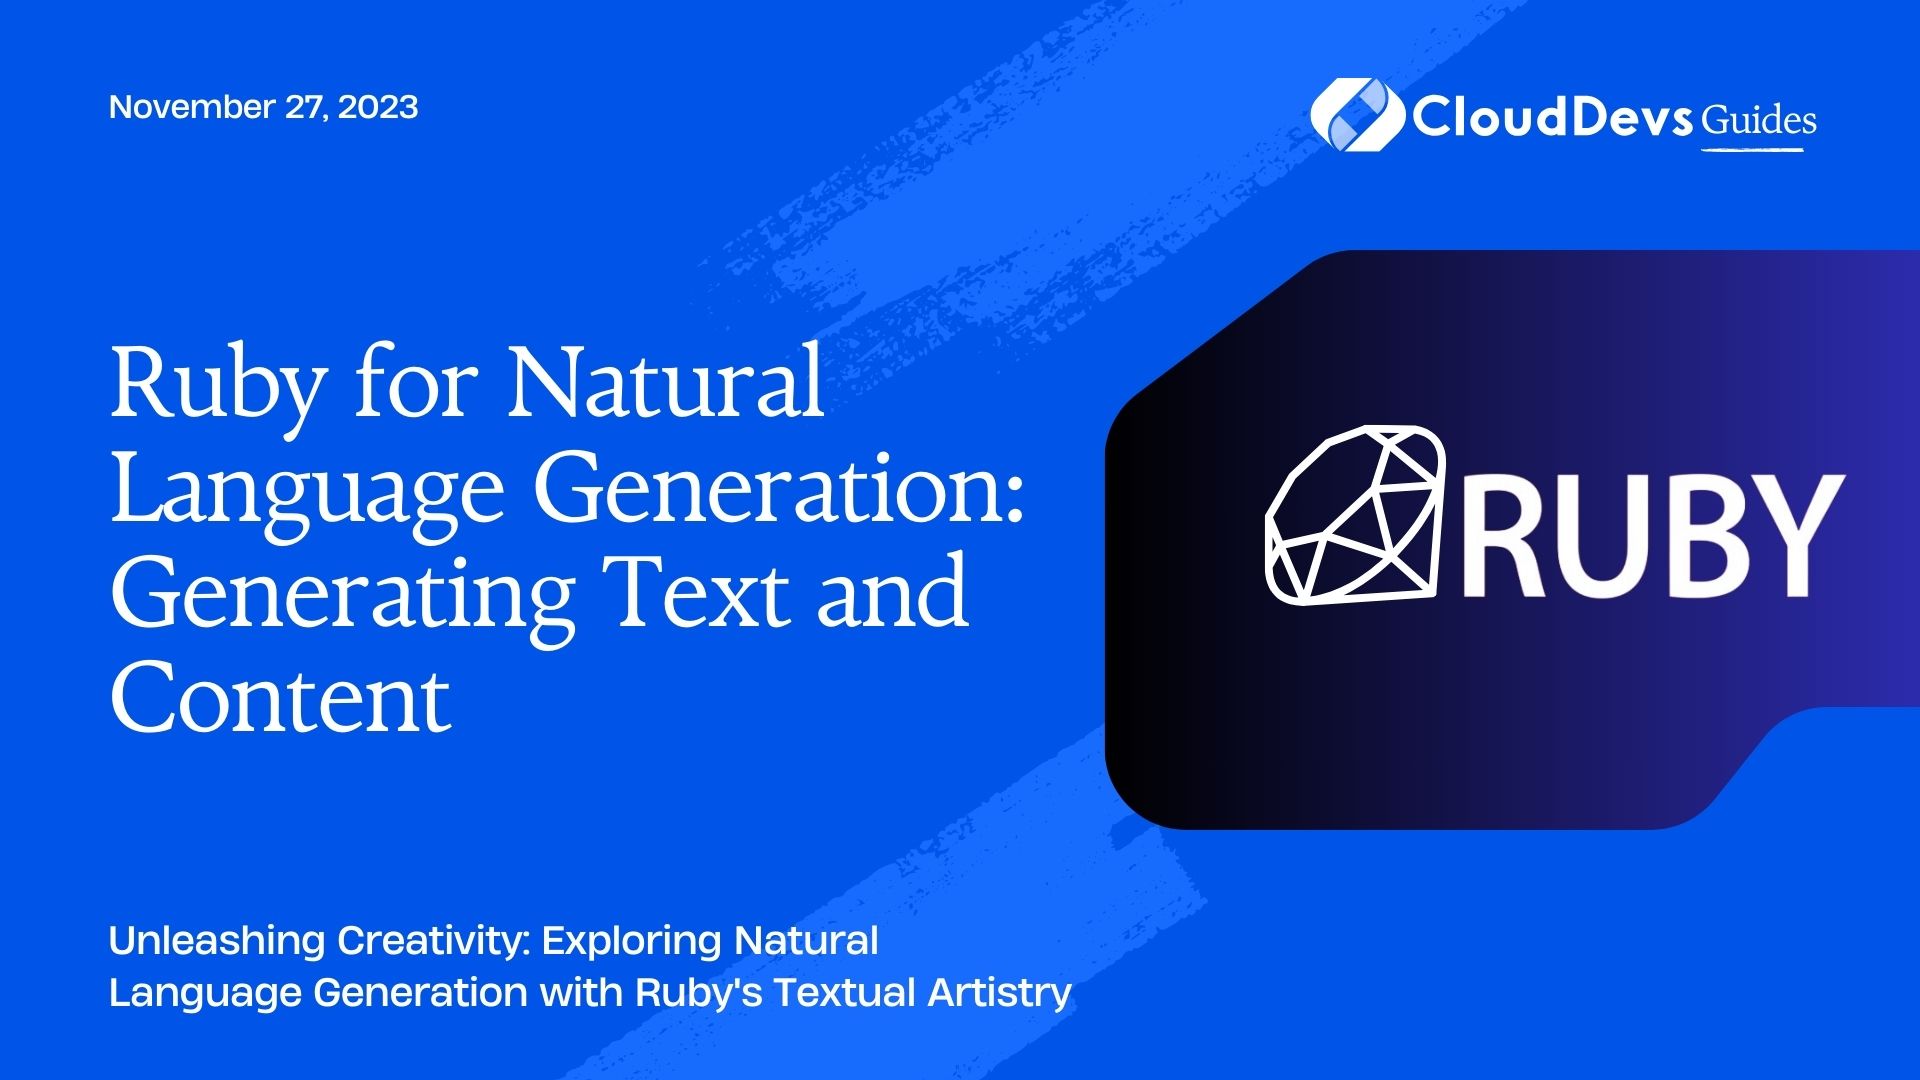 Ruby for Natural Language Generation: Generating Text and Content